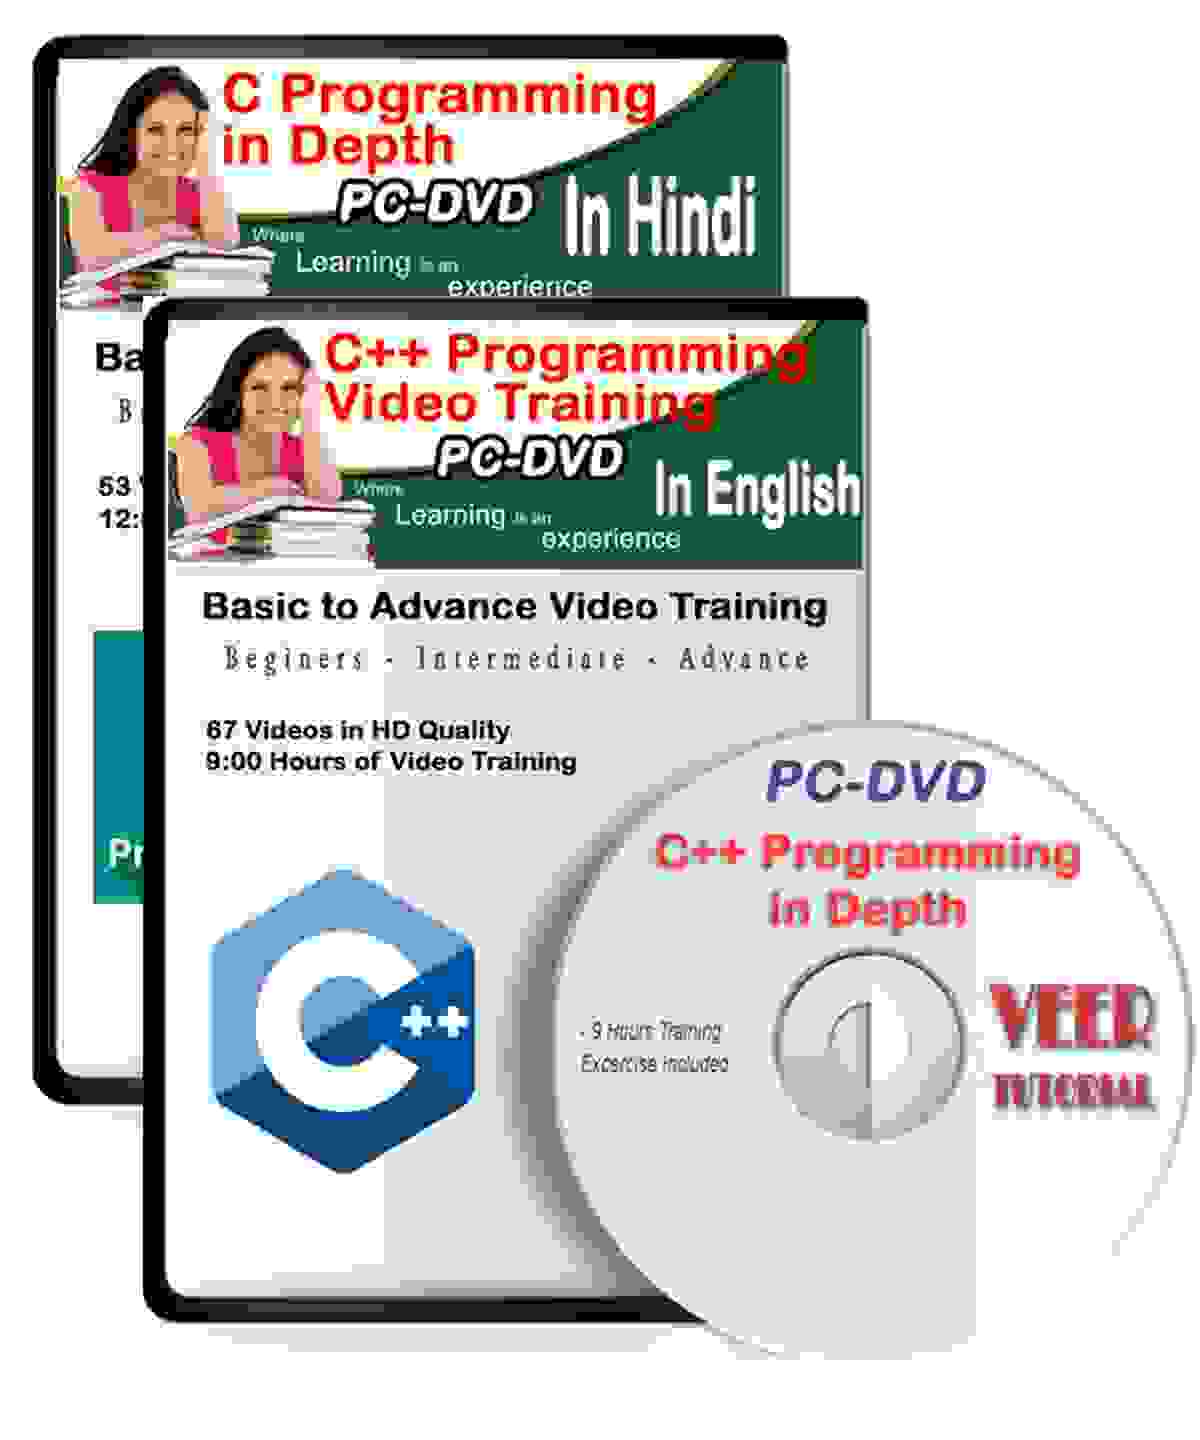 C/C++ Tutorial DVD Video Training (112 Vidoes, 21 Hrs) 2 DVDs Hindi+English Learning Video